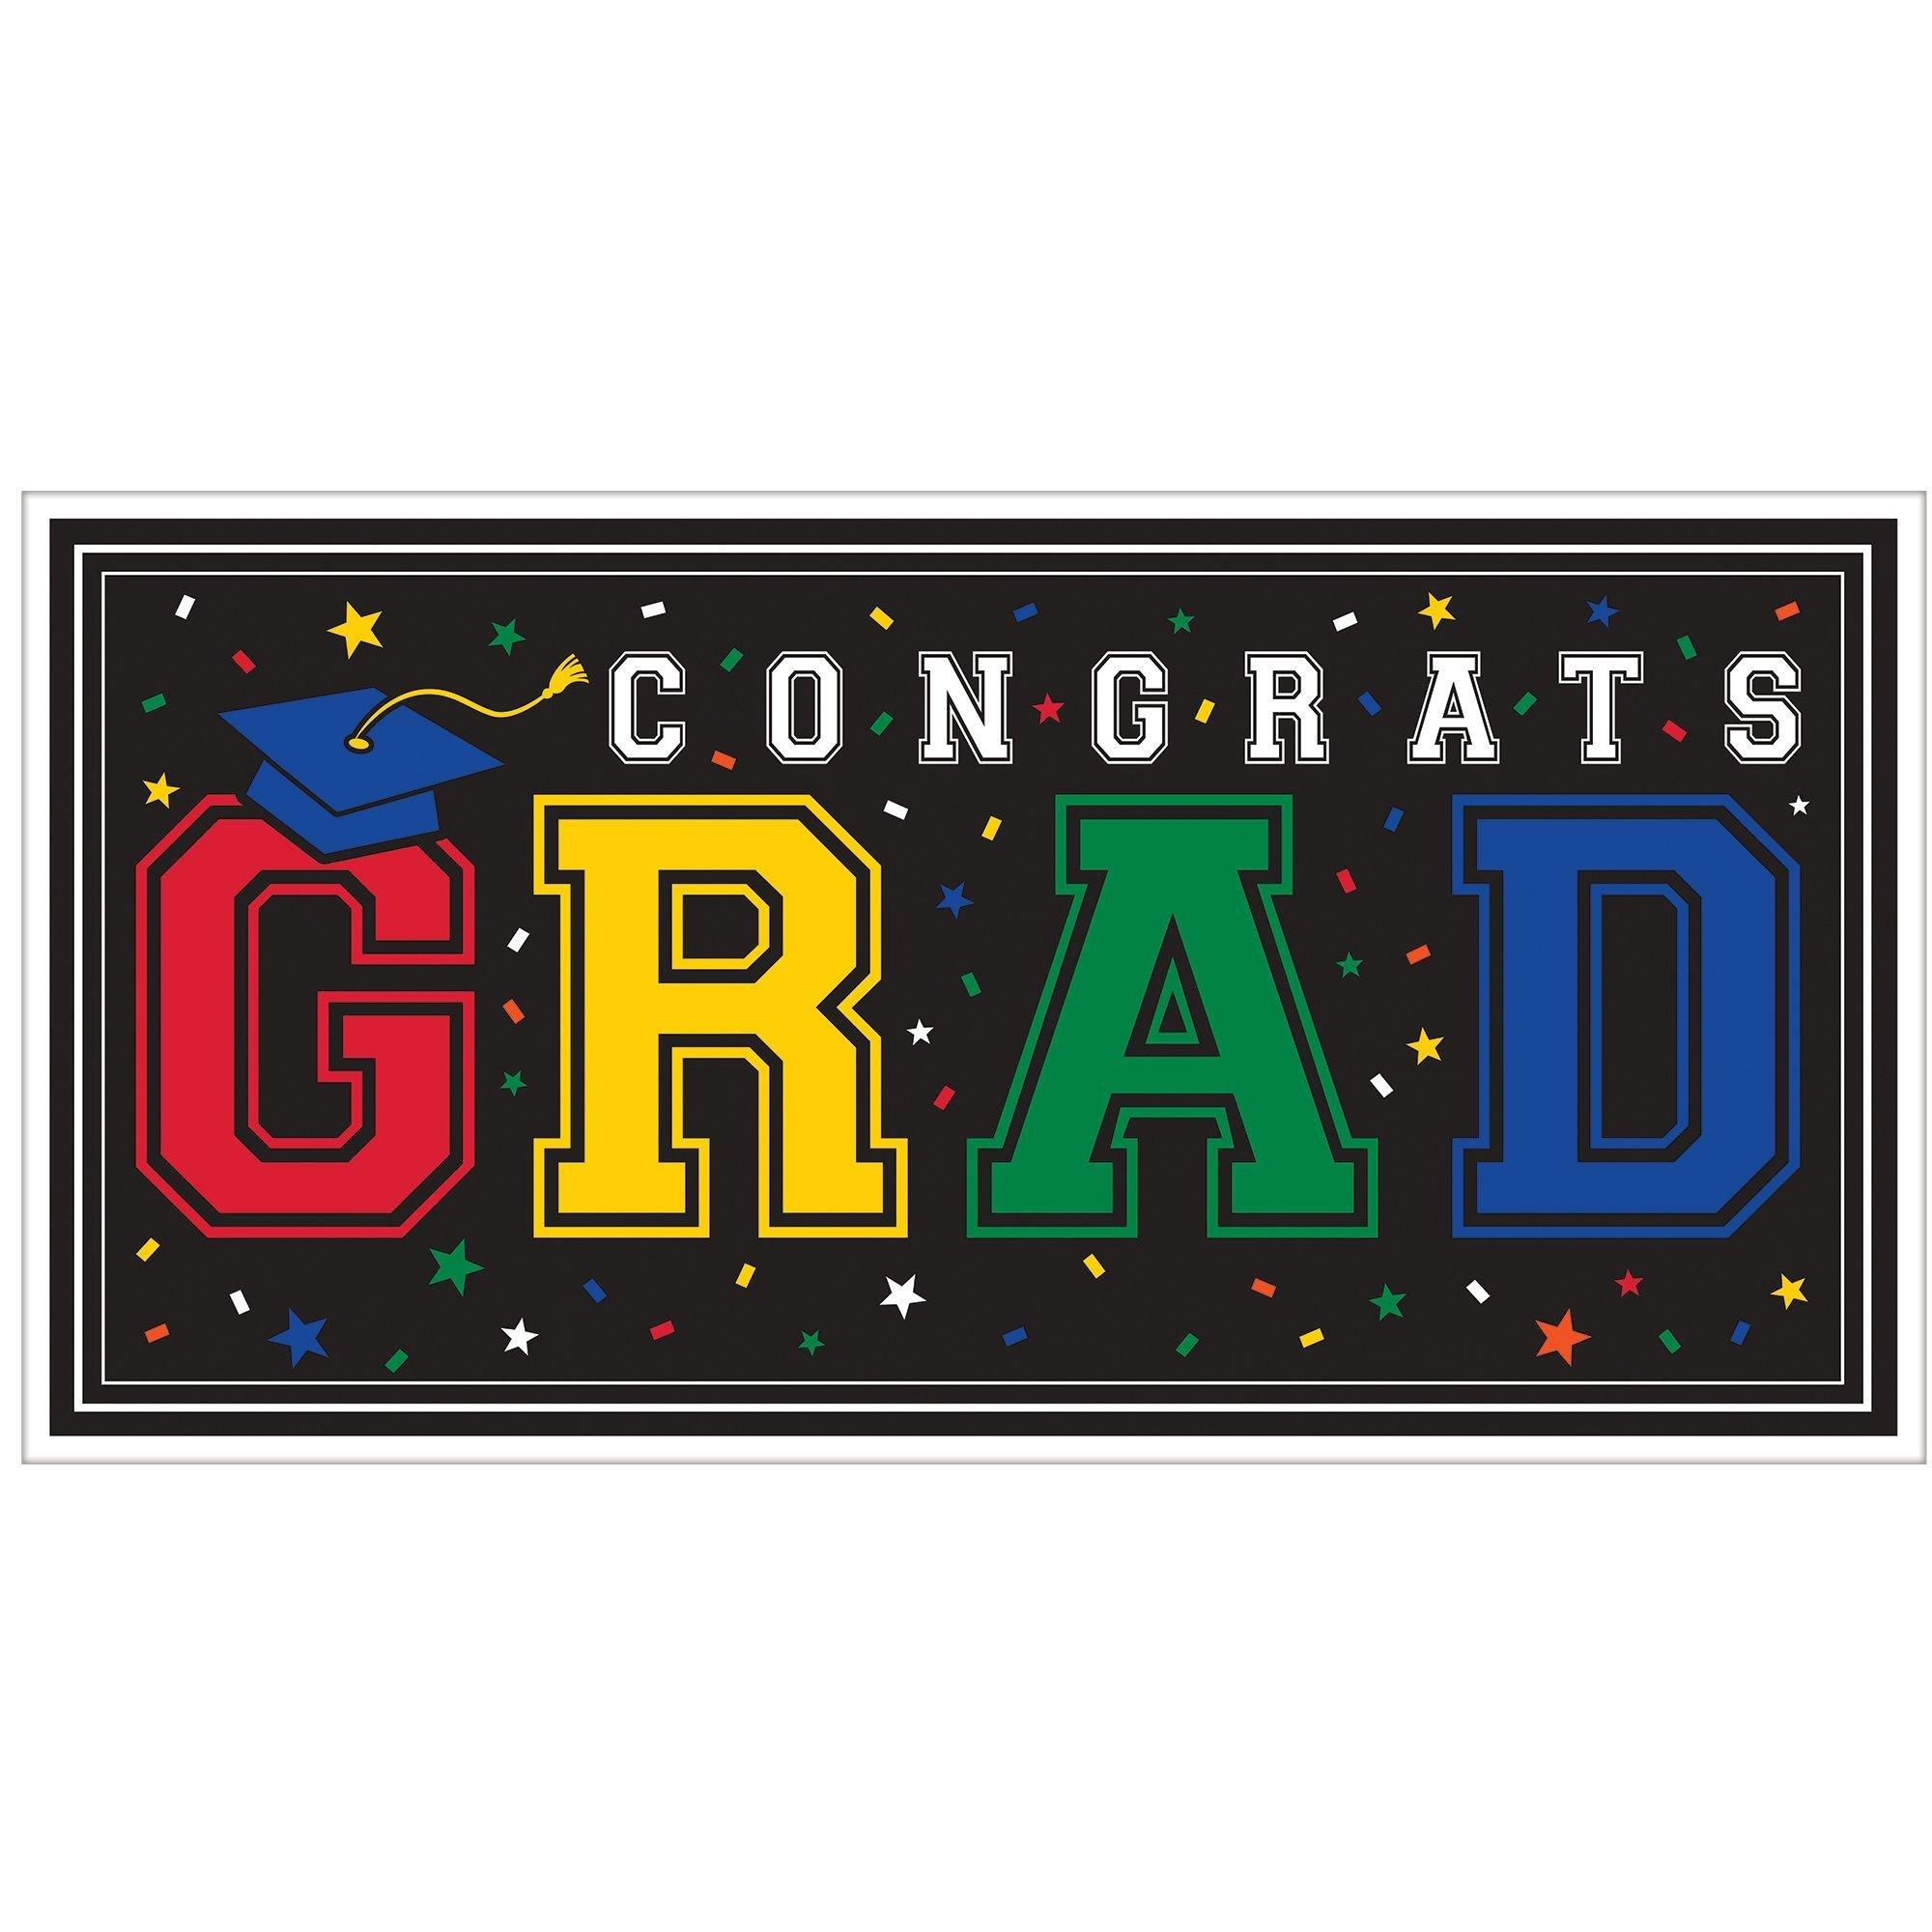 Graduation Party Supplies Kit for 40 with Decorations, Banners, Balloons, Plates, Napkins - Yellow Congrats